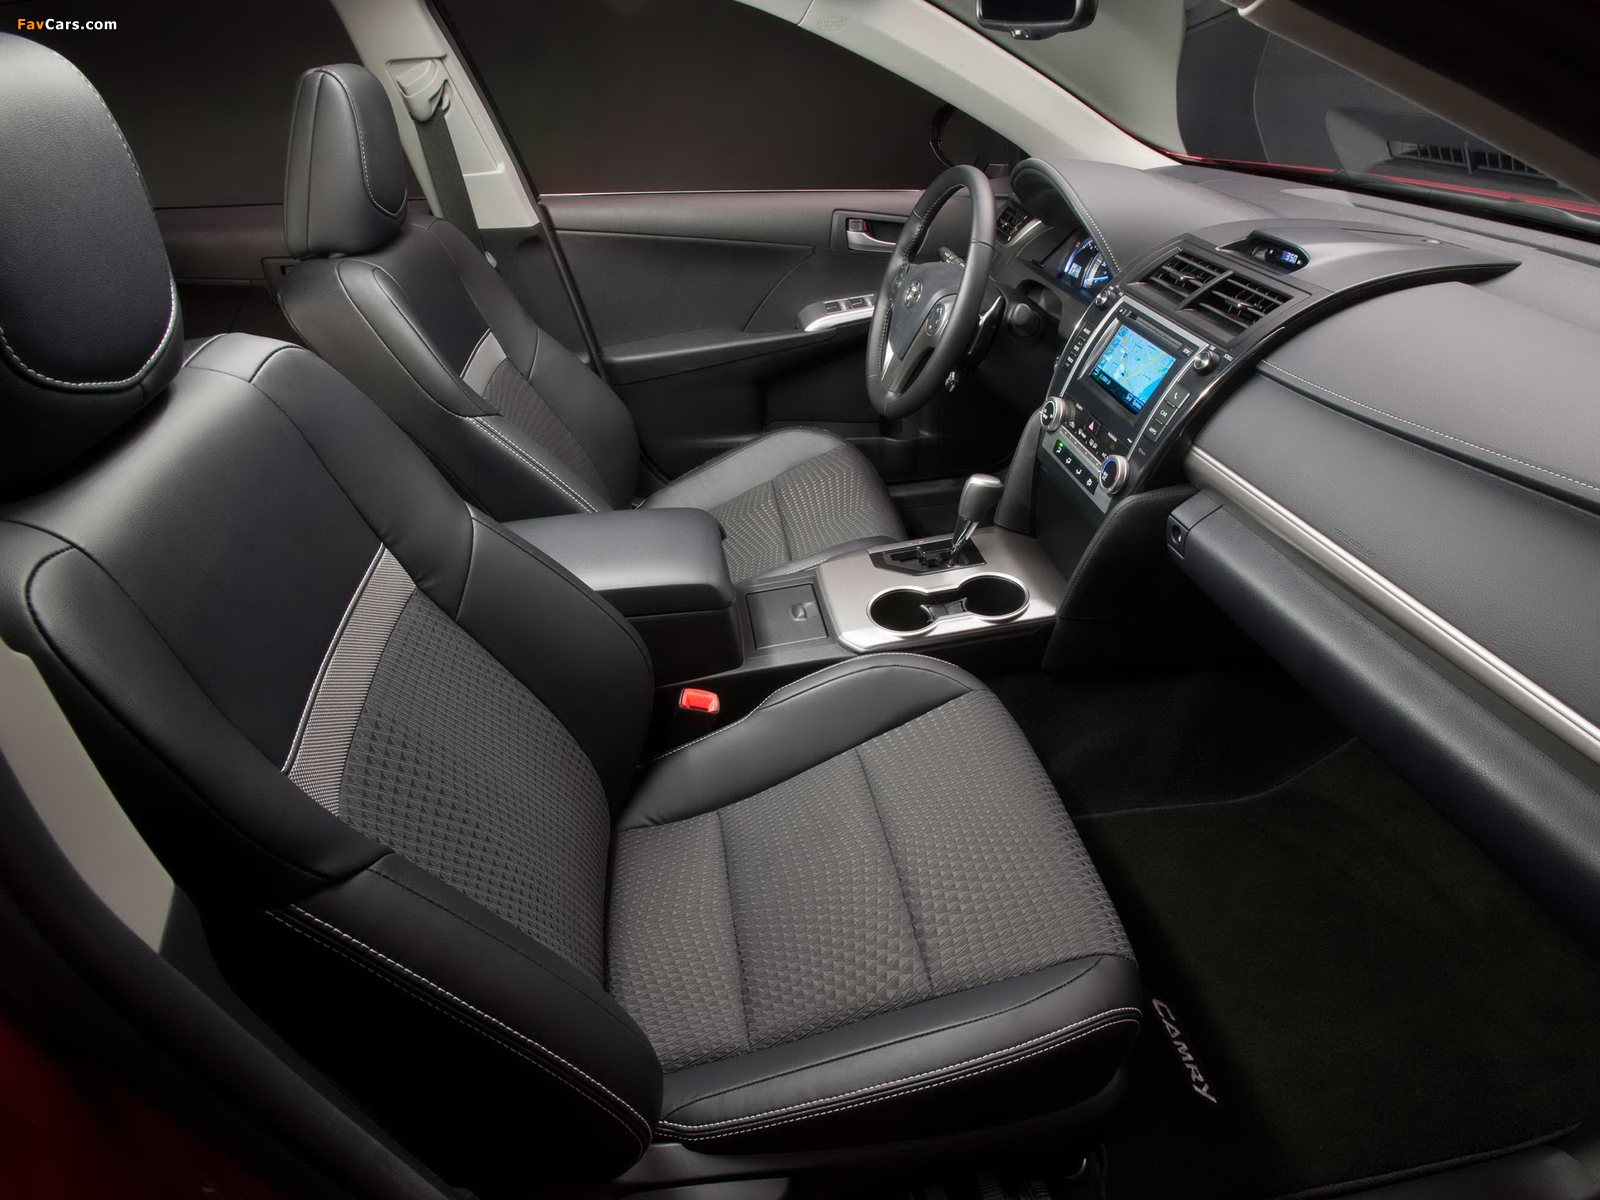 Toyota Camry SE 2011 pictures (1600 x 1200)